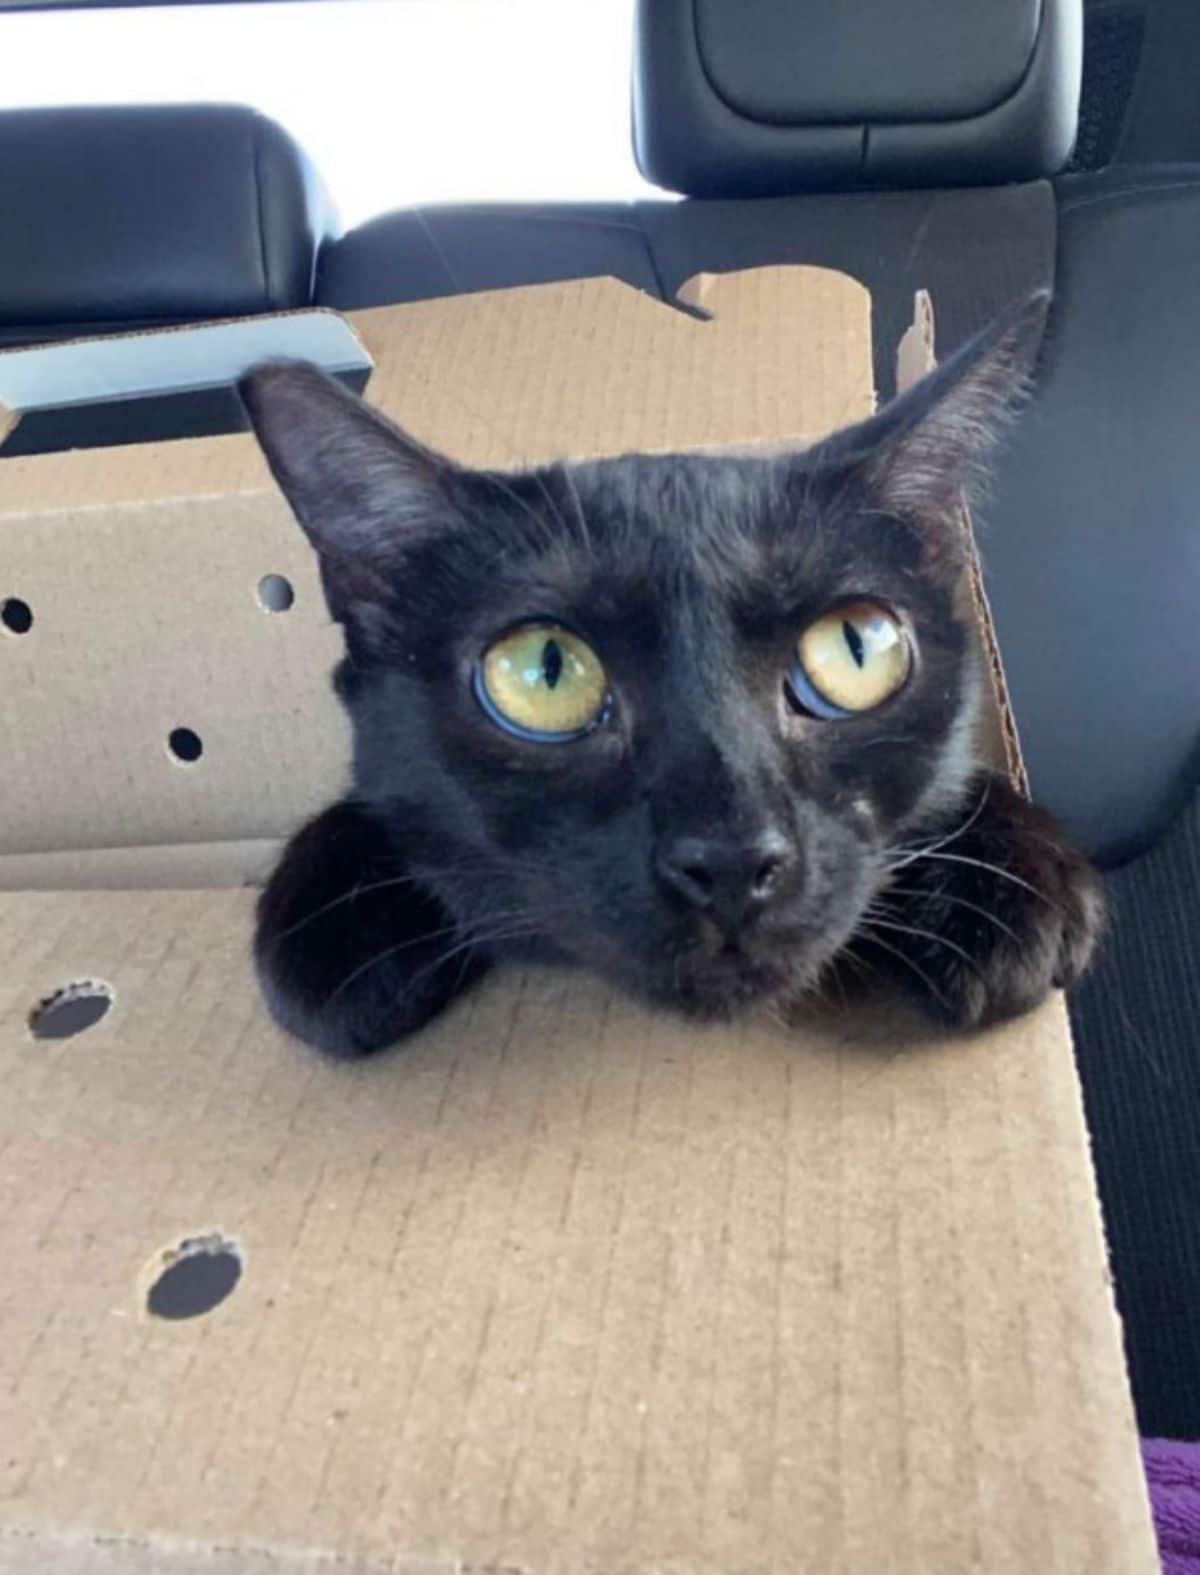 black cat peeking out the top of a cardboard box inside a vehicle